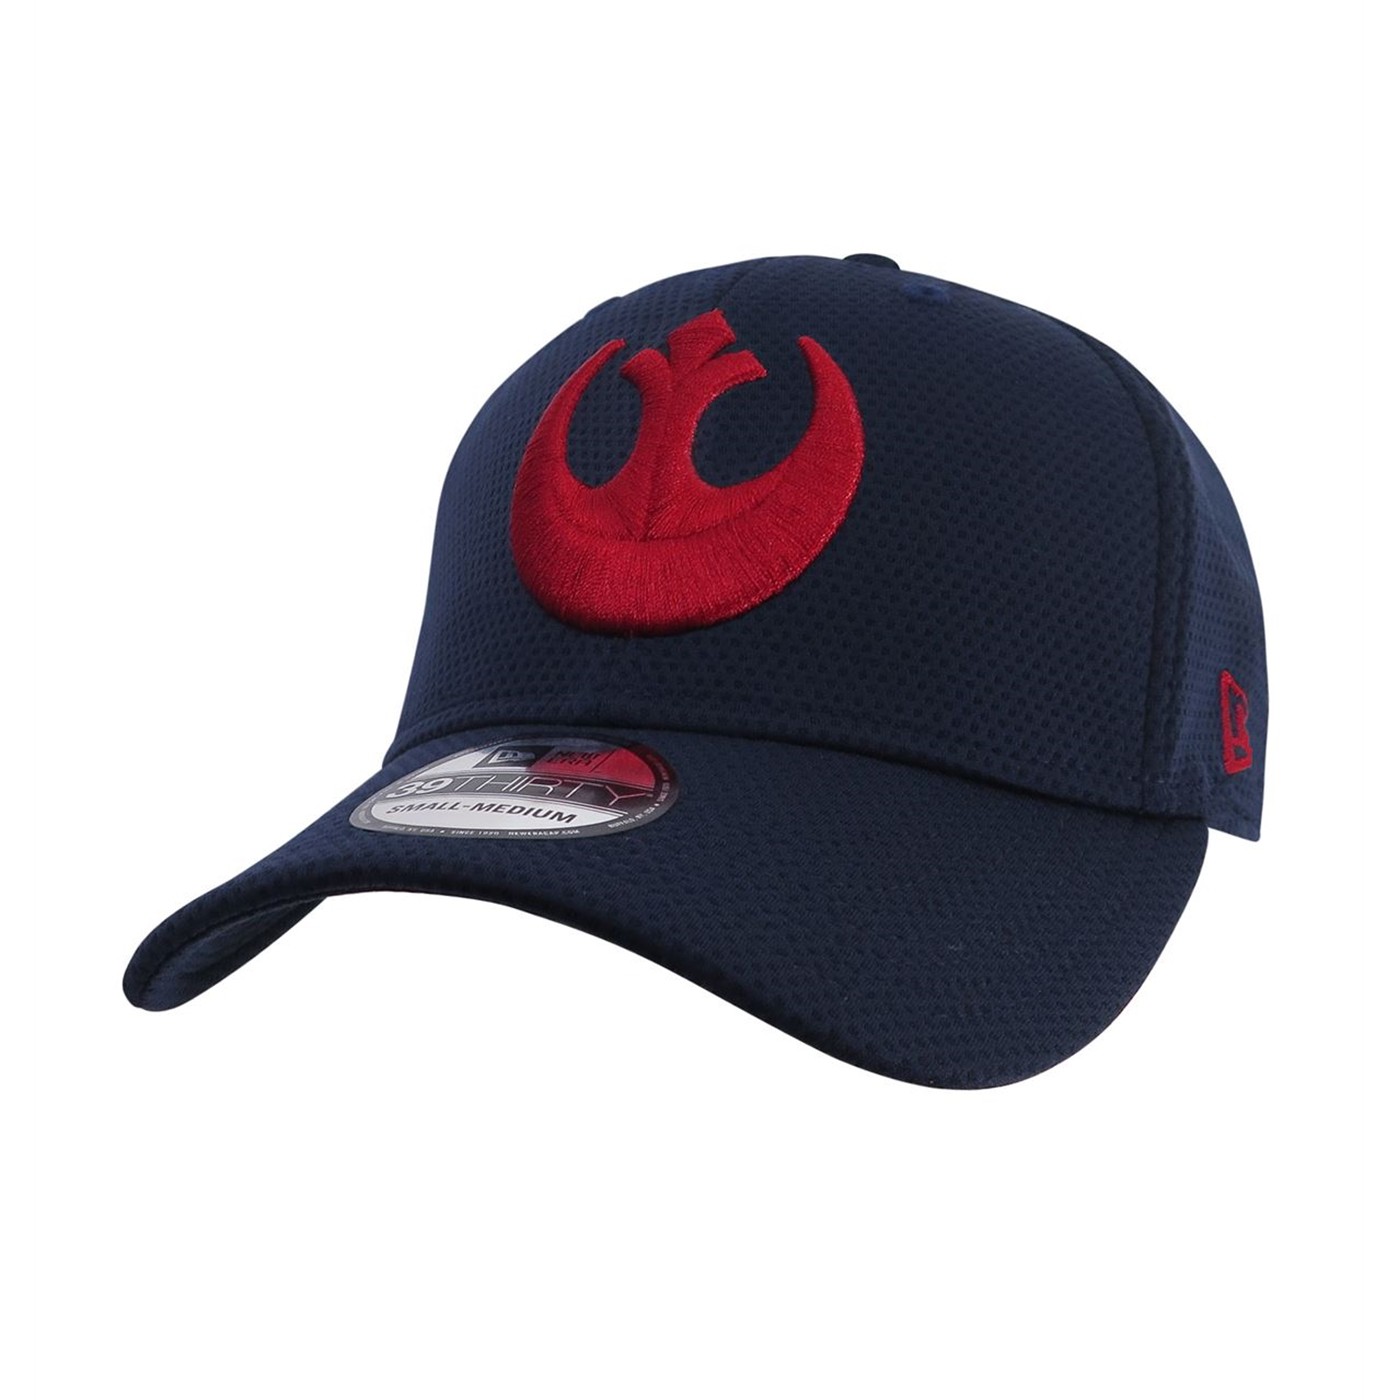 Star Wars Rogue Squadron Logo Embroidered Patch Baseball Cap Hat NEW 